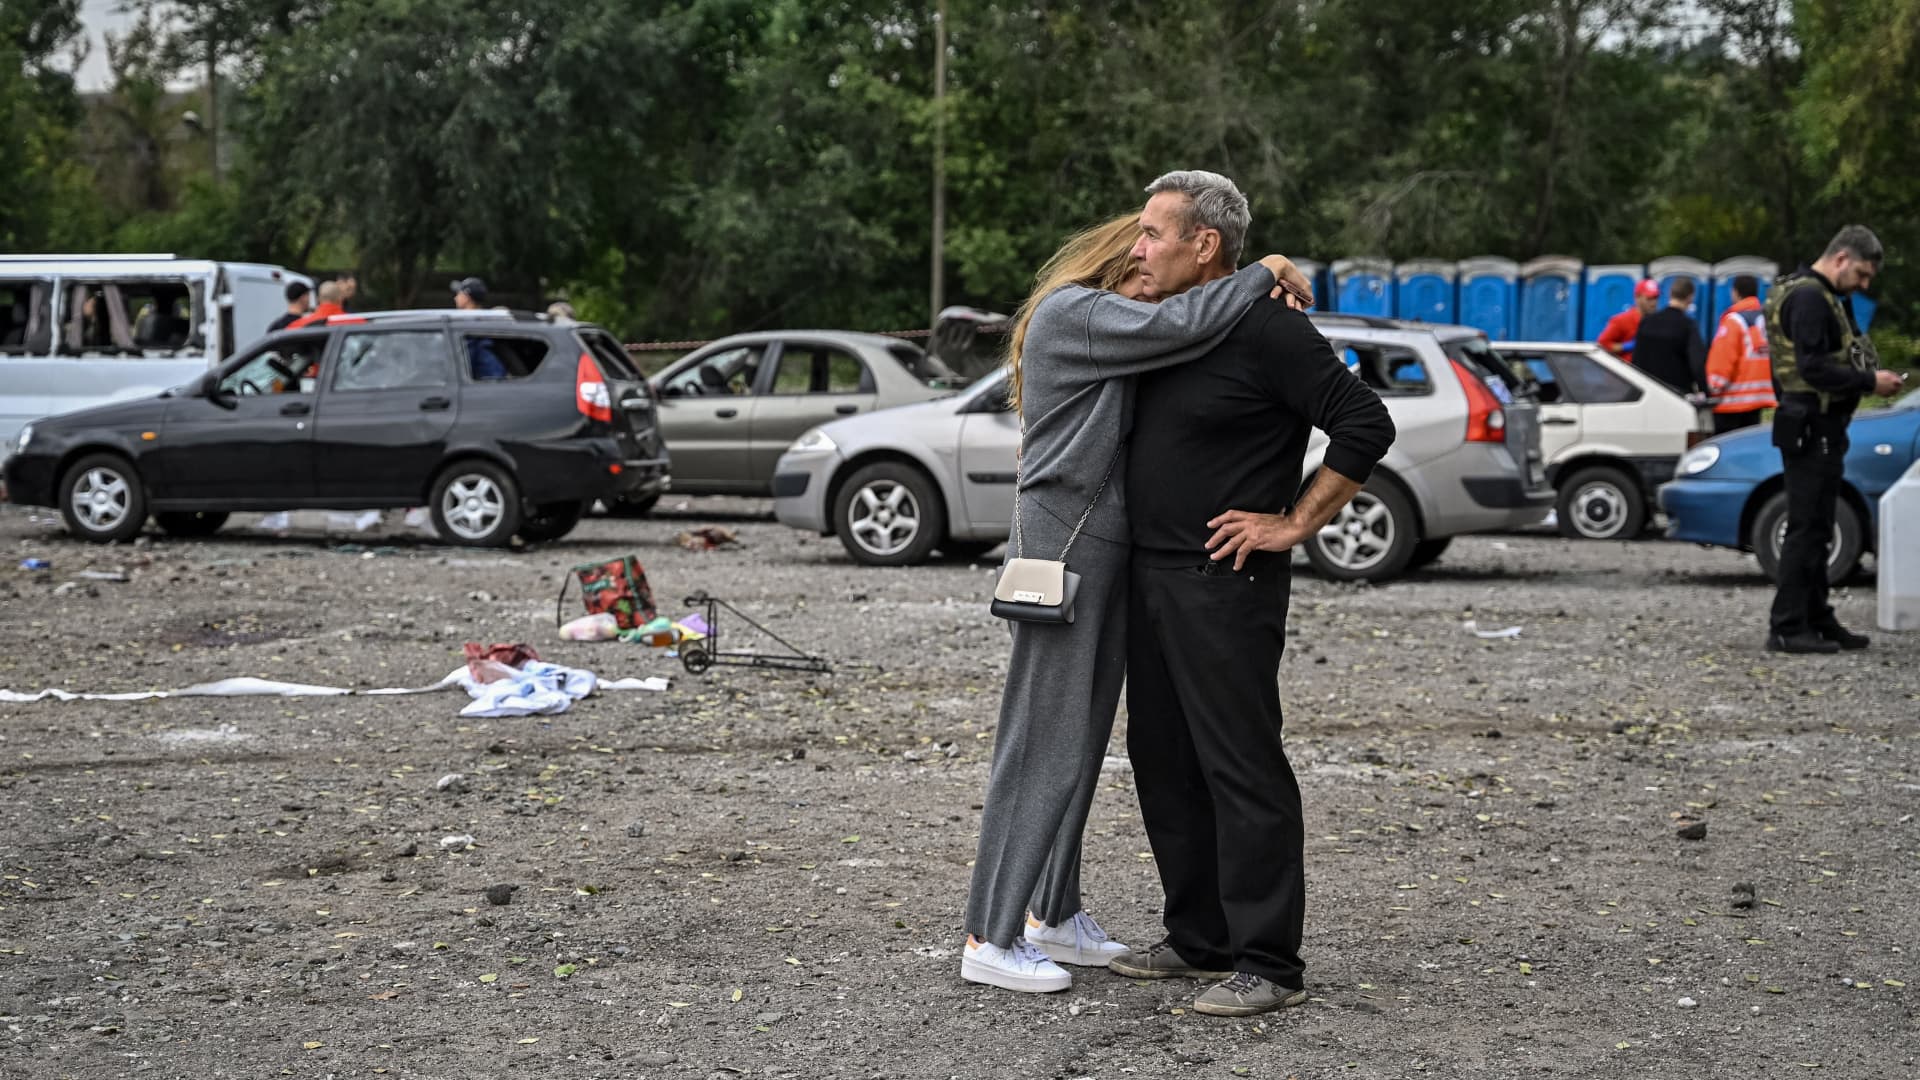 A couple hug each other near cars damaged by a missile strike on a road near Zaporizhzhia on September 30, 2022, amid the Russian invasion of Ukraine.